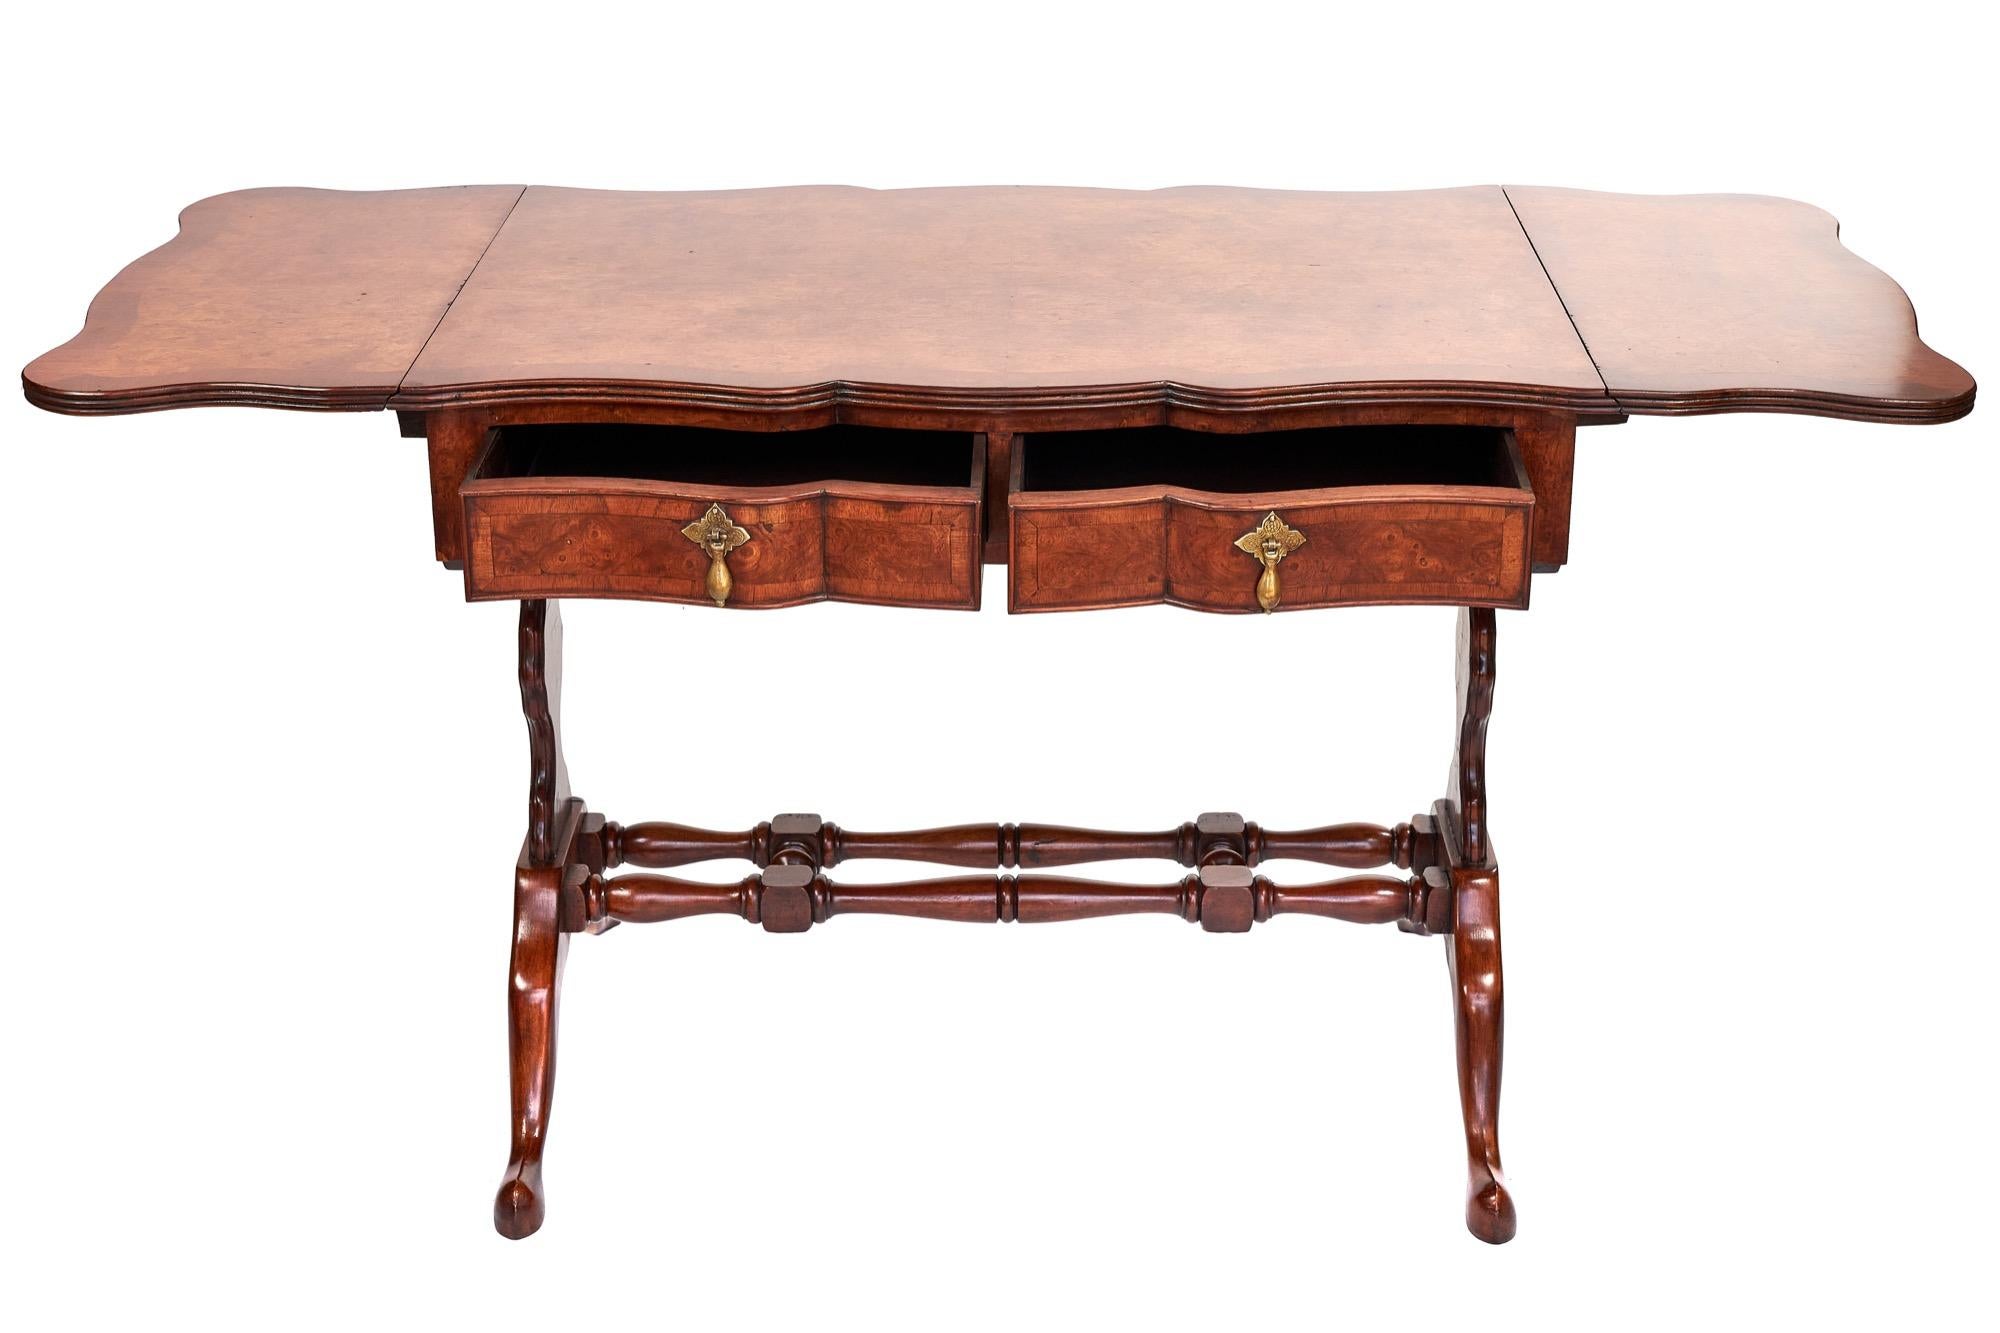 This is an antique burr walnut centre table of exceptional quality with a beautiful burr walnut top with pretty walnut crossbanding. It boasts two elegant shaped front drawers with oak linings, two dummy drawers to the rear. Dual turned cross